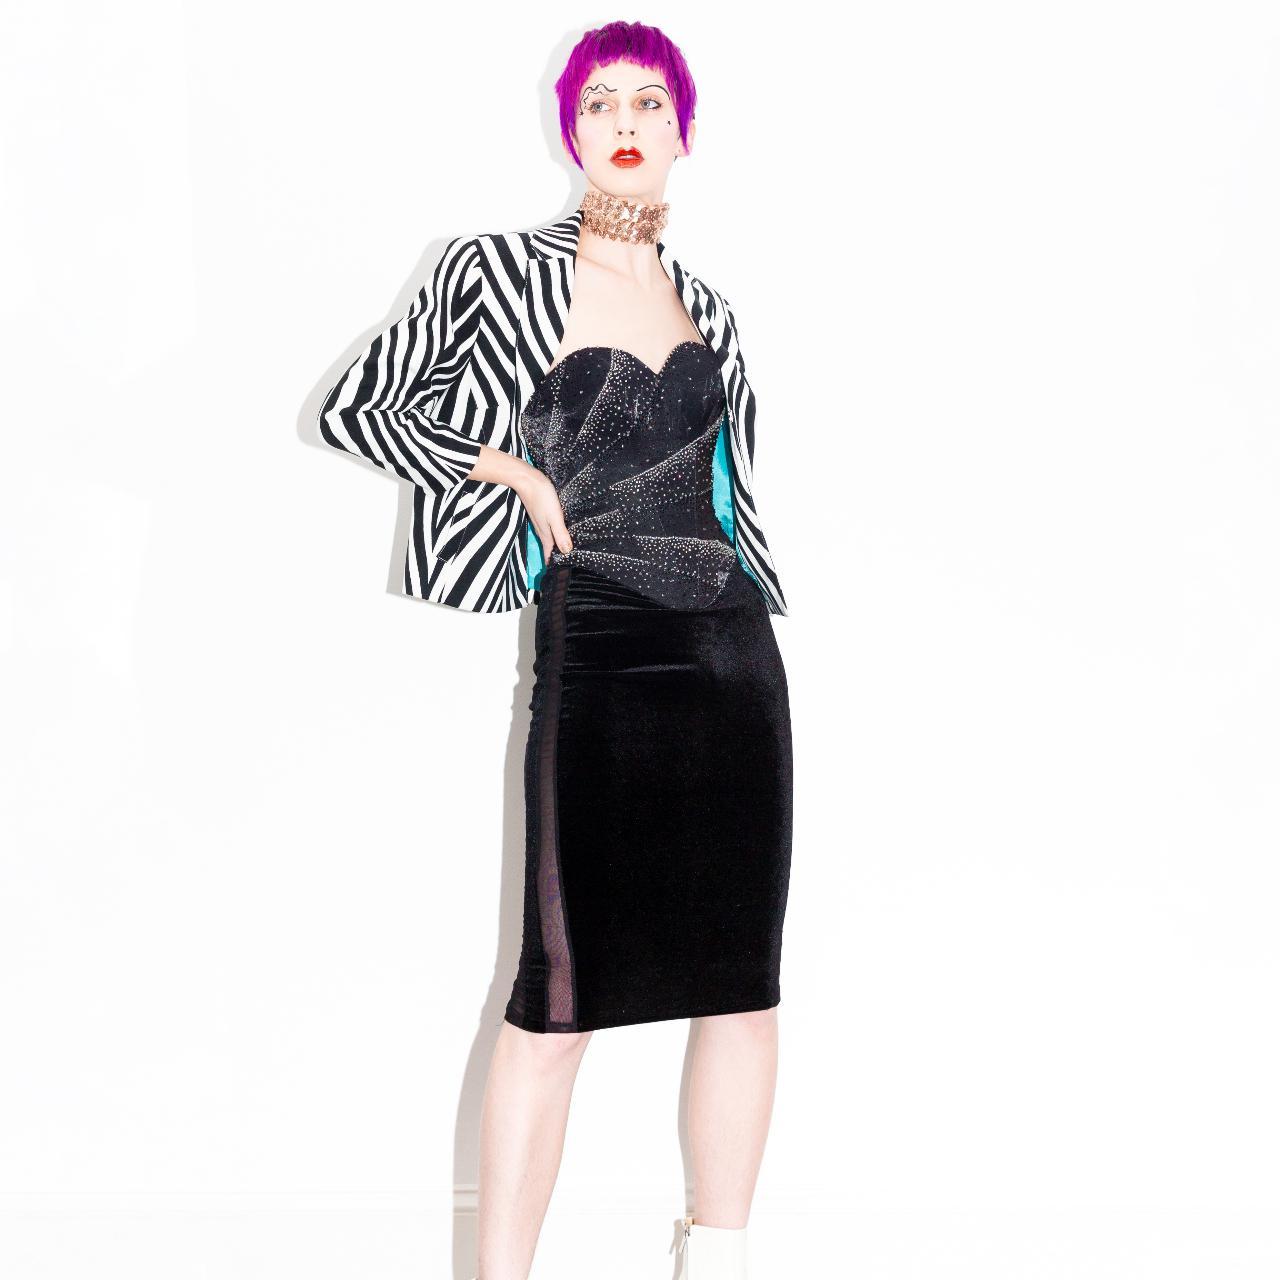 Product Image 2 - CRUELLA EAT YOUR HEART OUT
Black